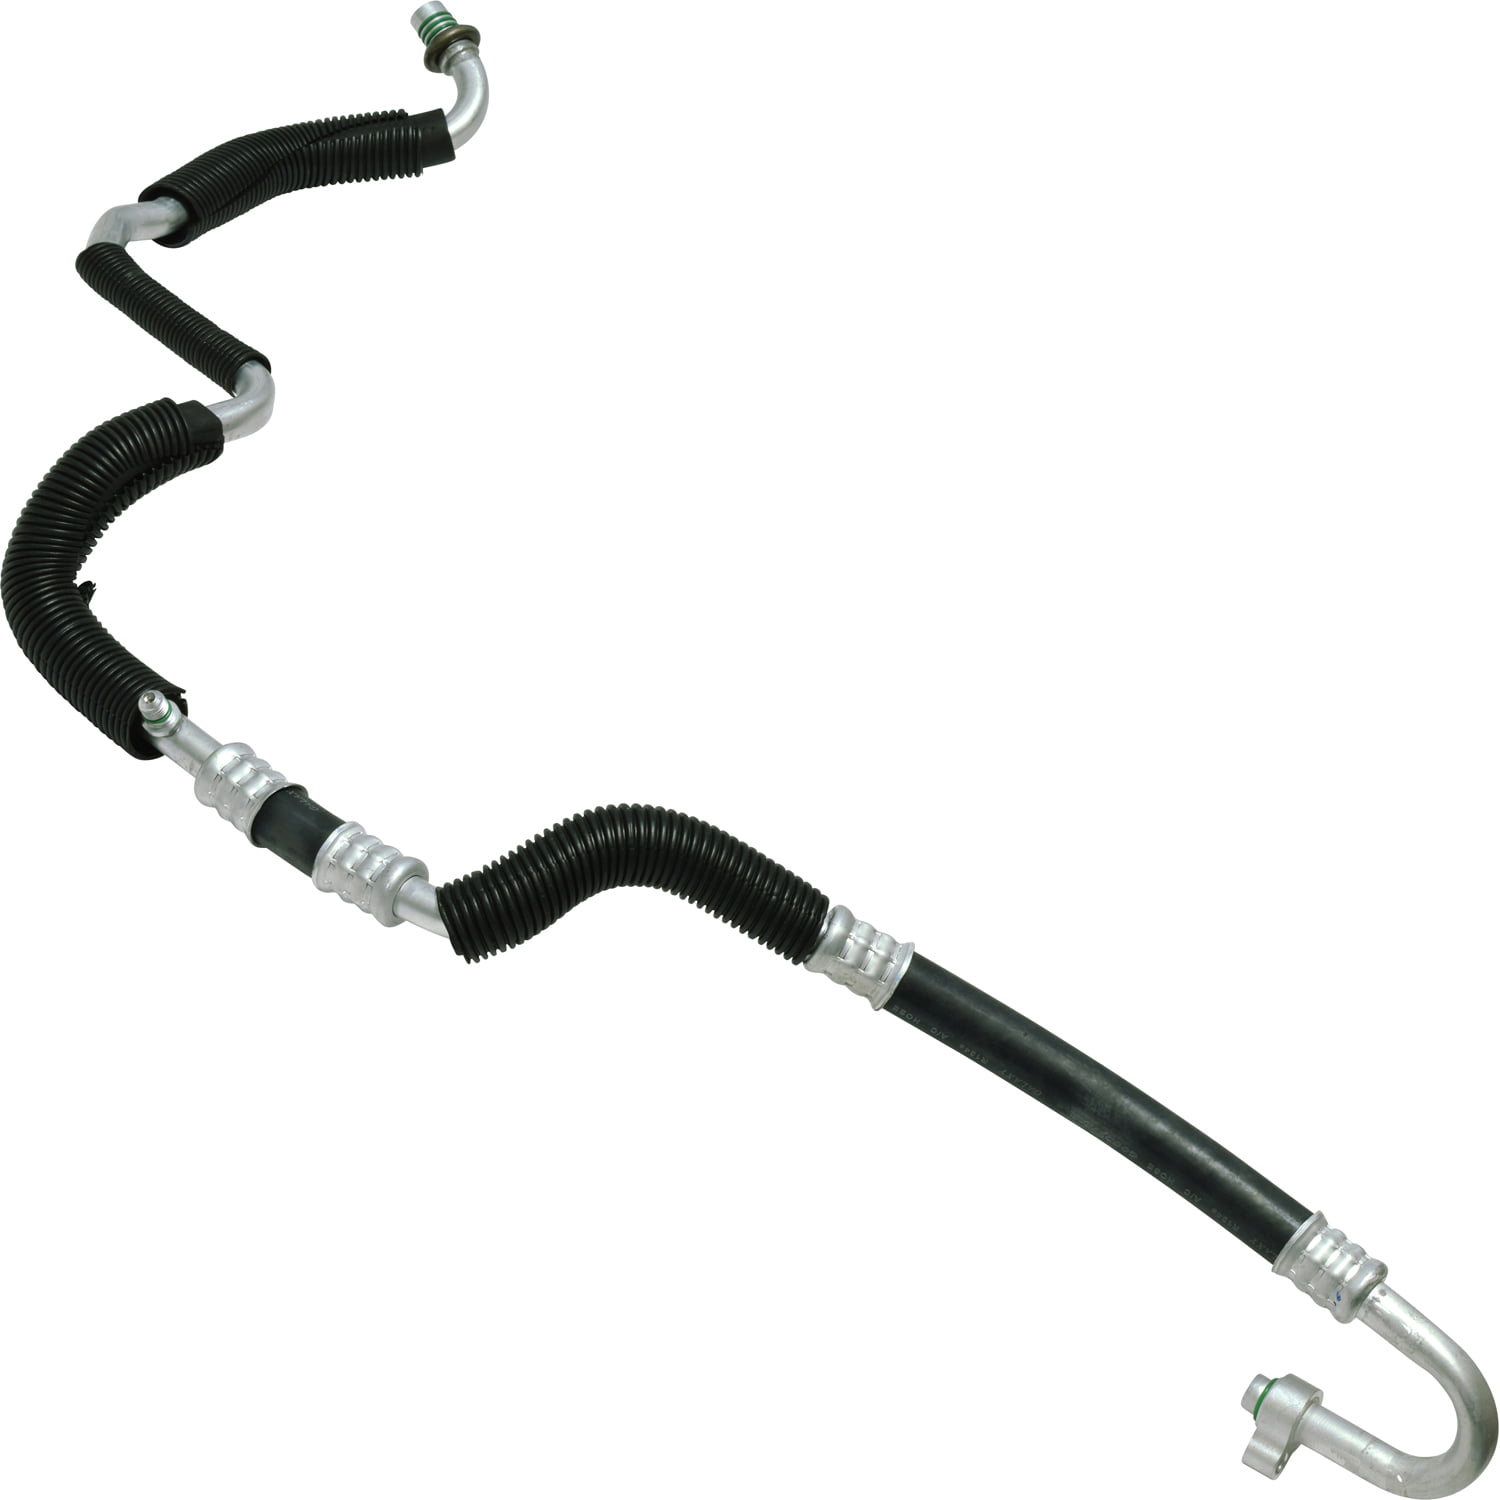 Manufactured Up To 03/02; Replaces 1l2Z19835AB, 1l2Z-19835-AB APDTY 140155 A/C Line Hose With Serviceable Orifice Tube Assembly Fits 2002 Mountaineer W/o Rear AC & Ford Explorer W/o Rear A/C 